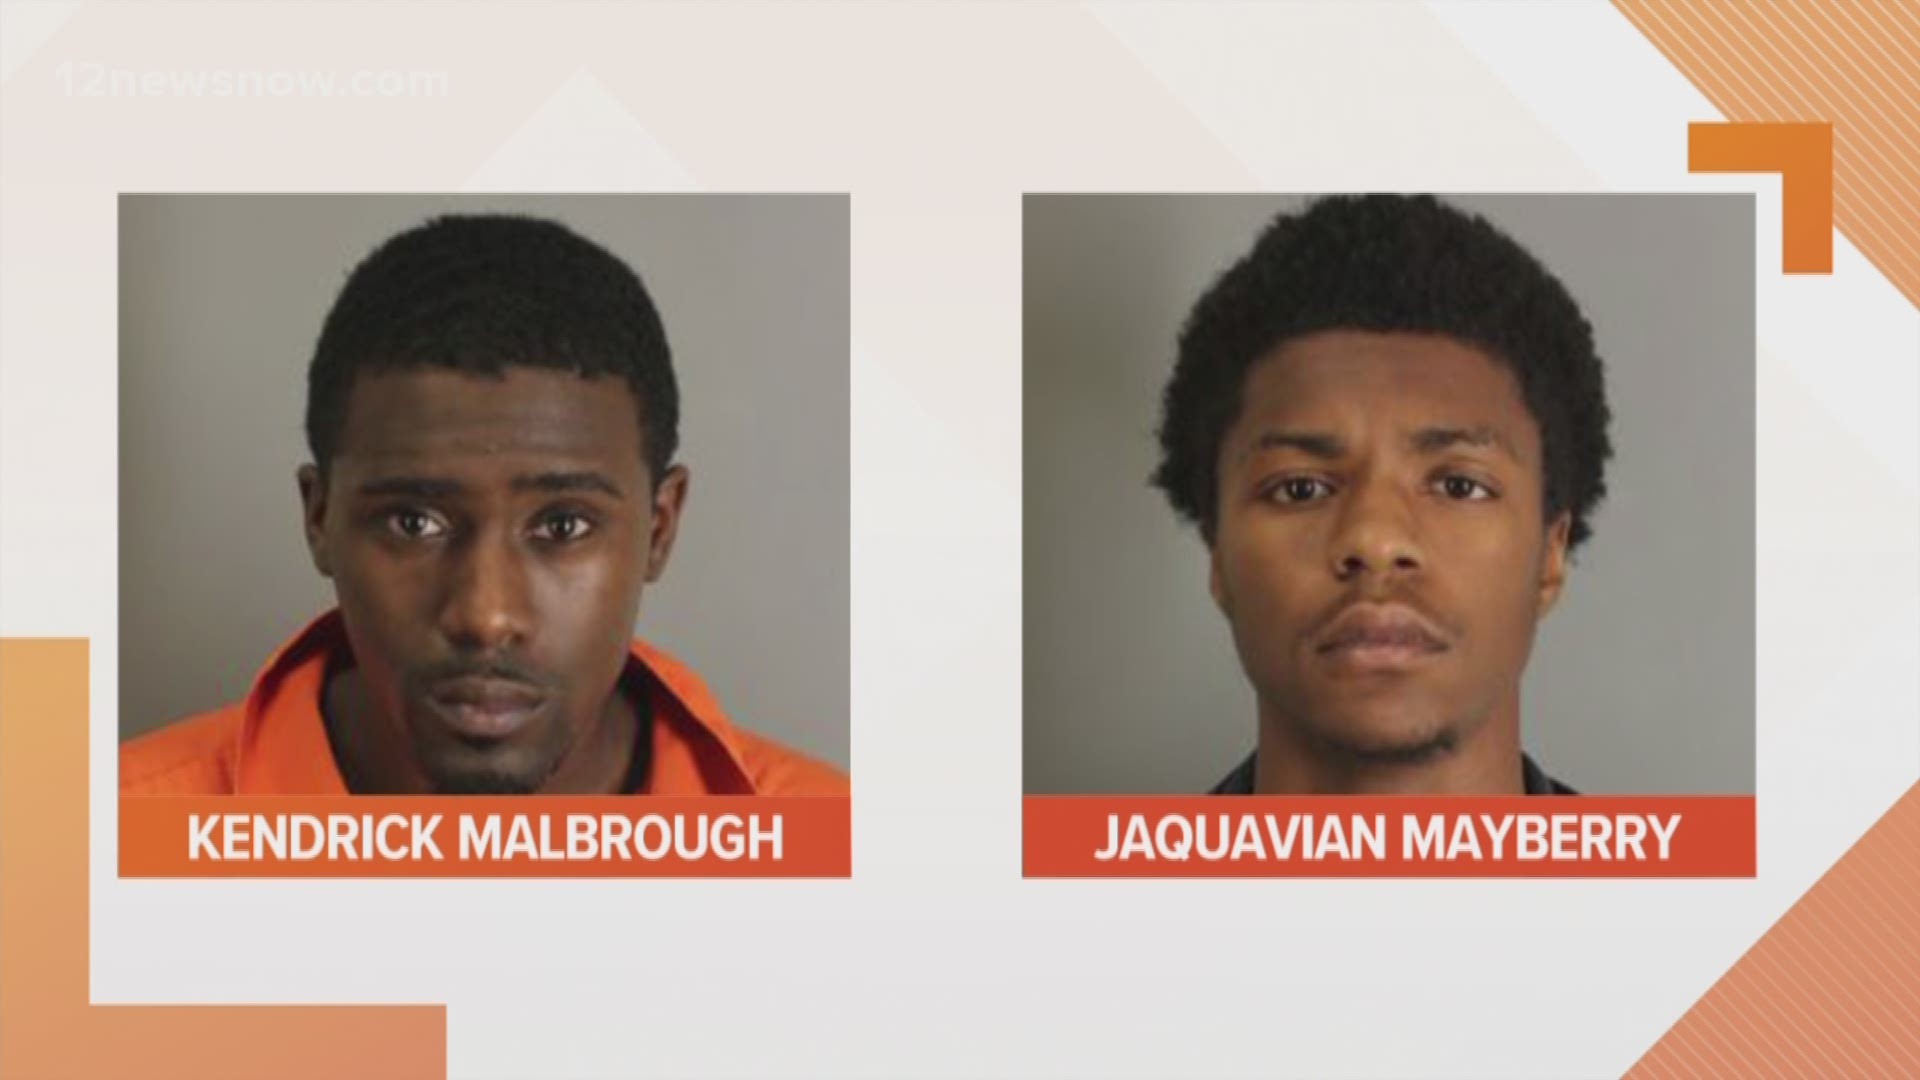 Kendrick Marlbrough, 22, of Beaumont and Jaquavian Mayberry, 19, of Beaumont were arrested Wednesday afternoon after a Beaumont Police officer spotted the two men in a stolen vehicle. 